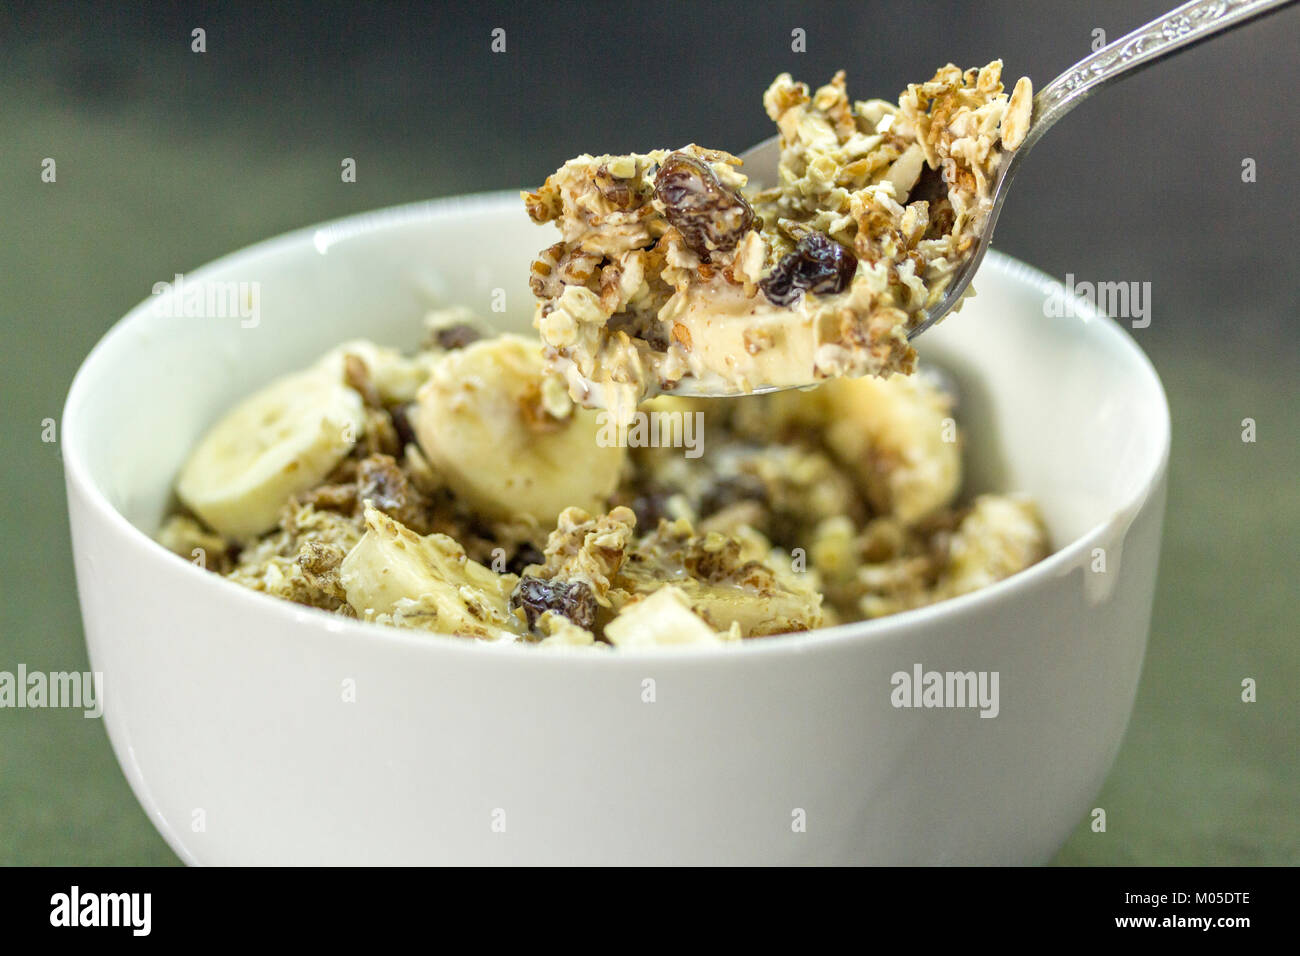 Breakfast idea bowl of cerial muesli with sliced banana and milk one of your five a day fruits and carbohydrates for slow release energy and it's nice Stock Photo